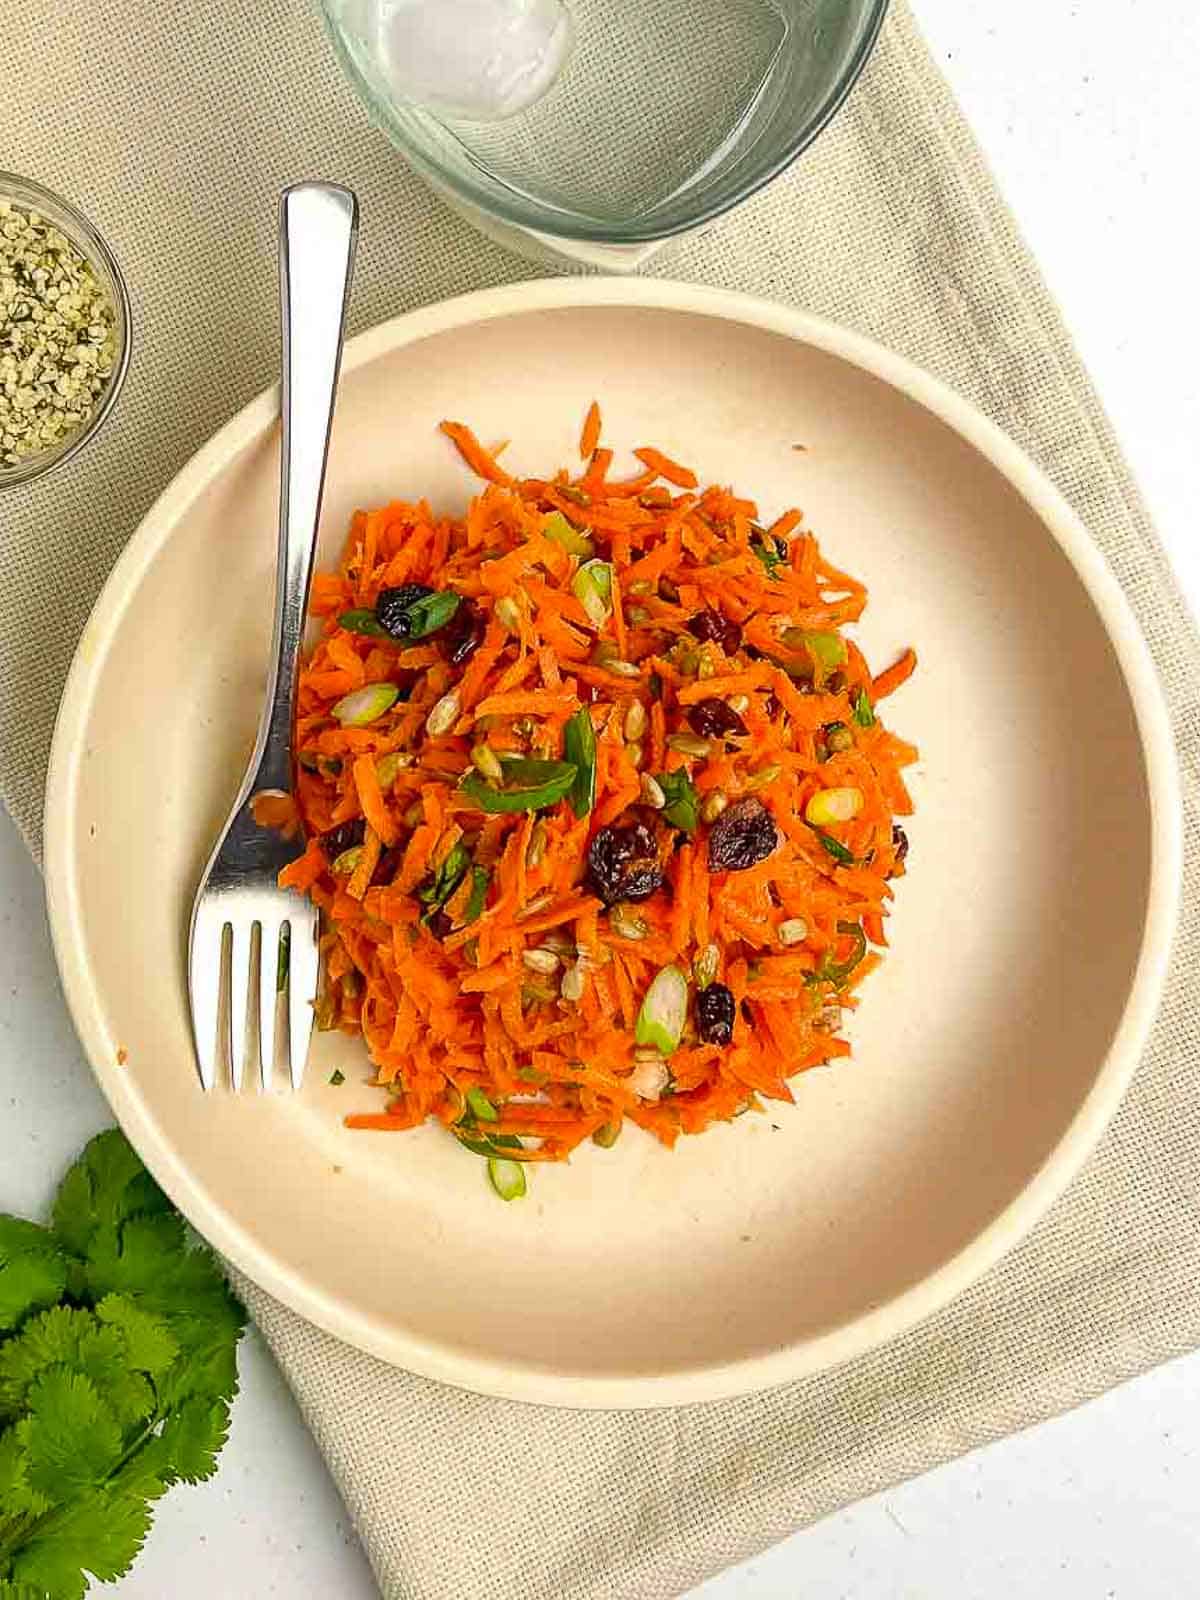 Raw Carrot Salad with raisins in a bowl with a fork.